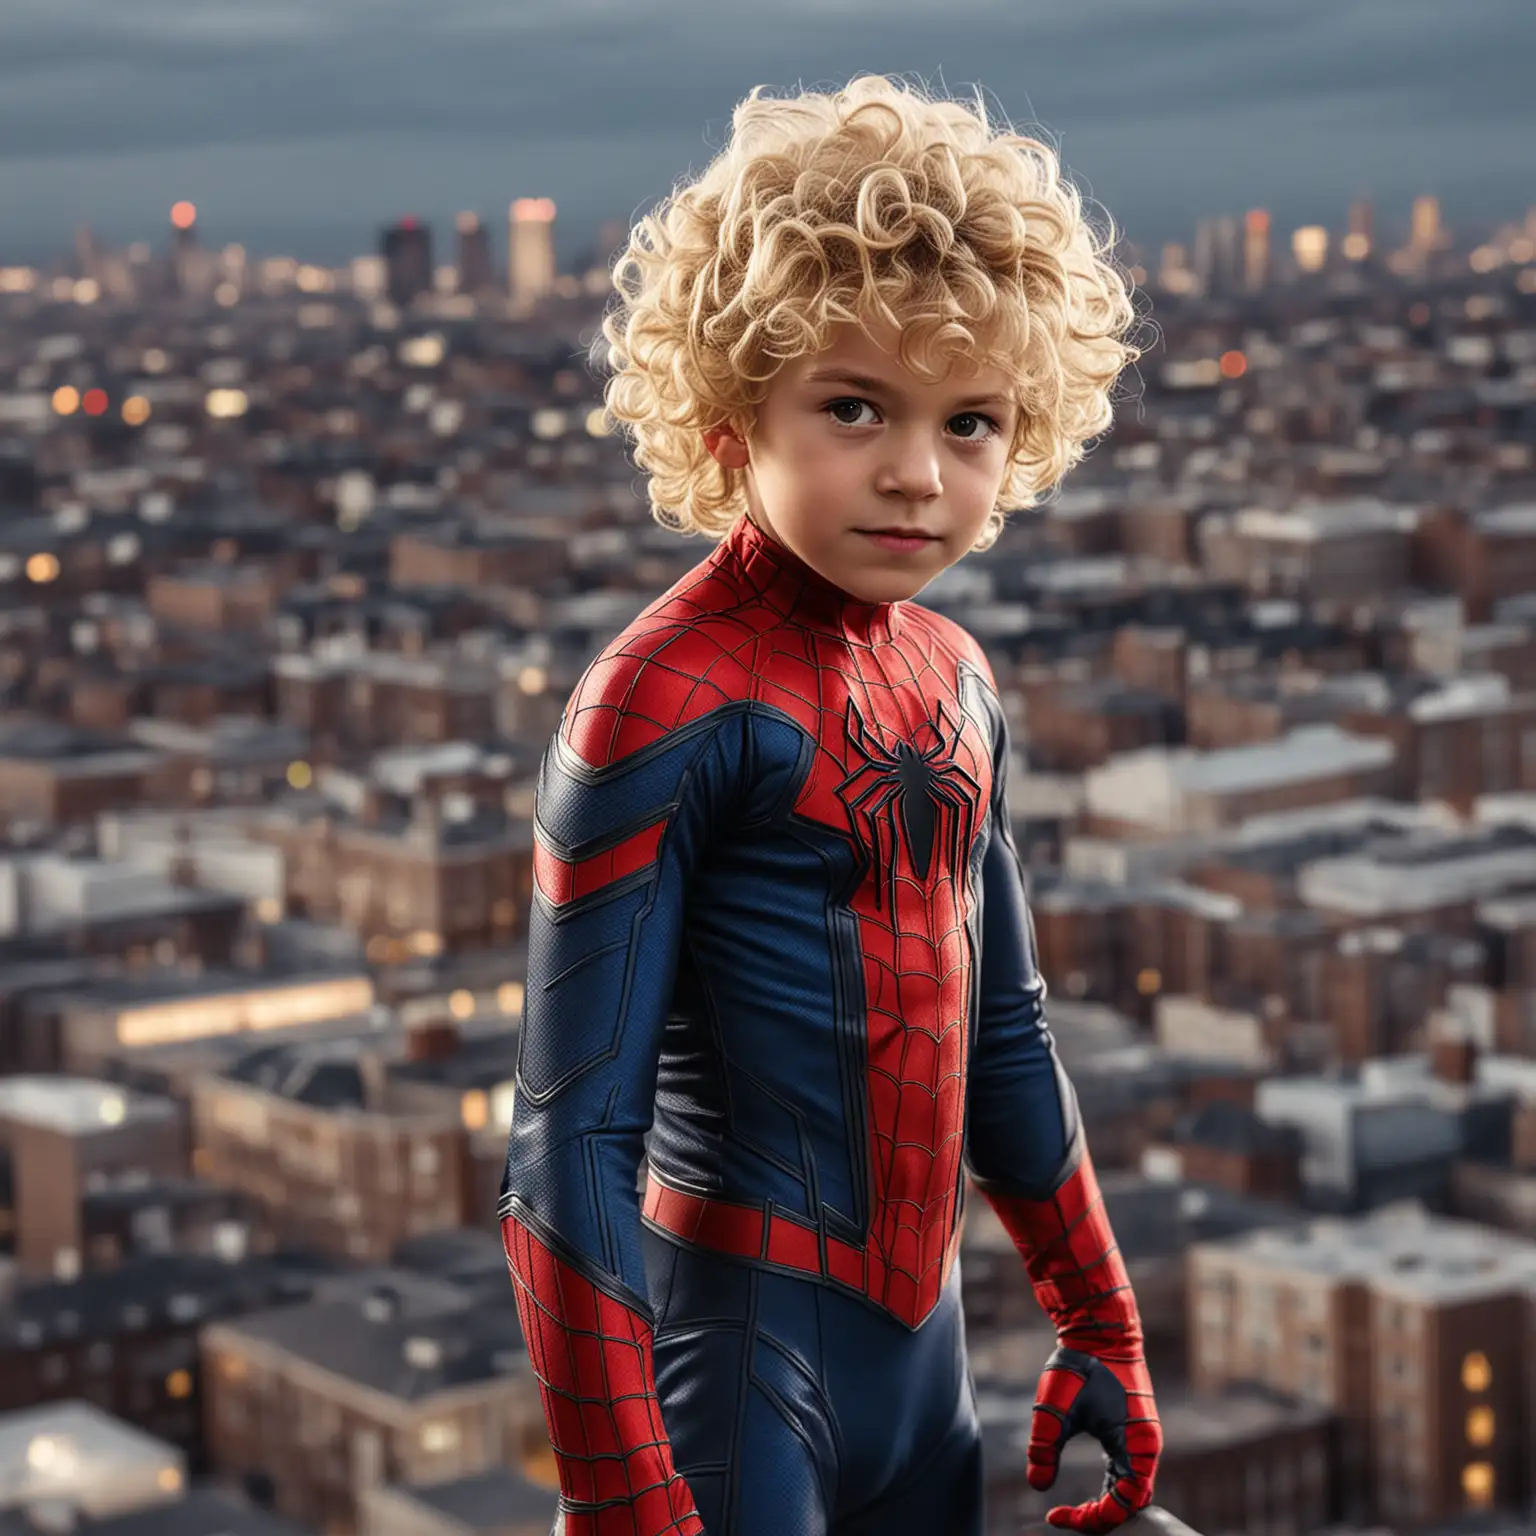 Young boy in superhero spiderman suit with blonde curly hair and a dark  cityscape behind him